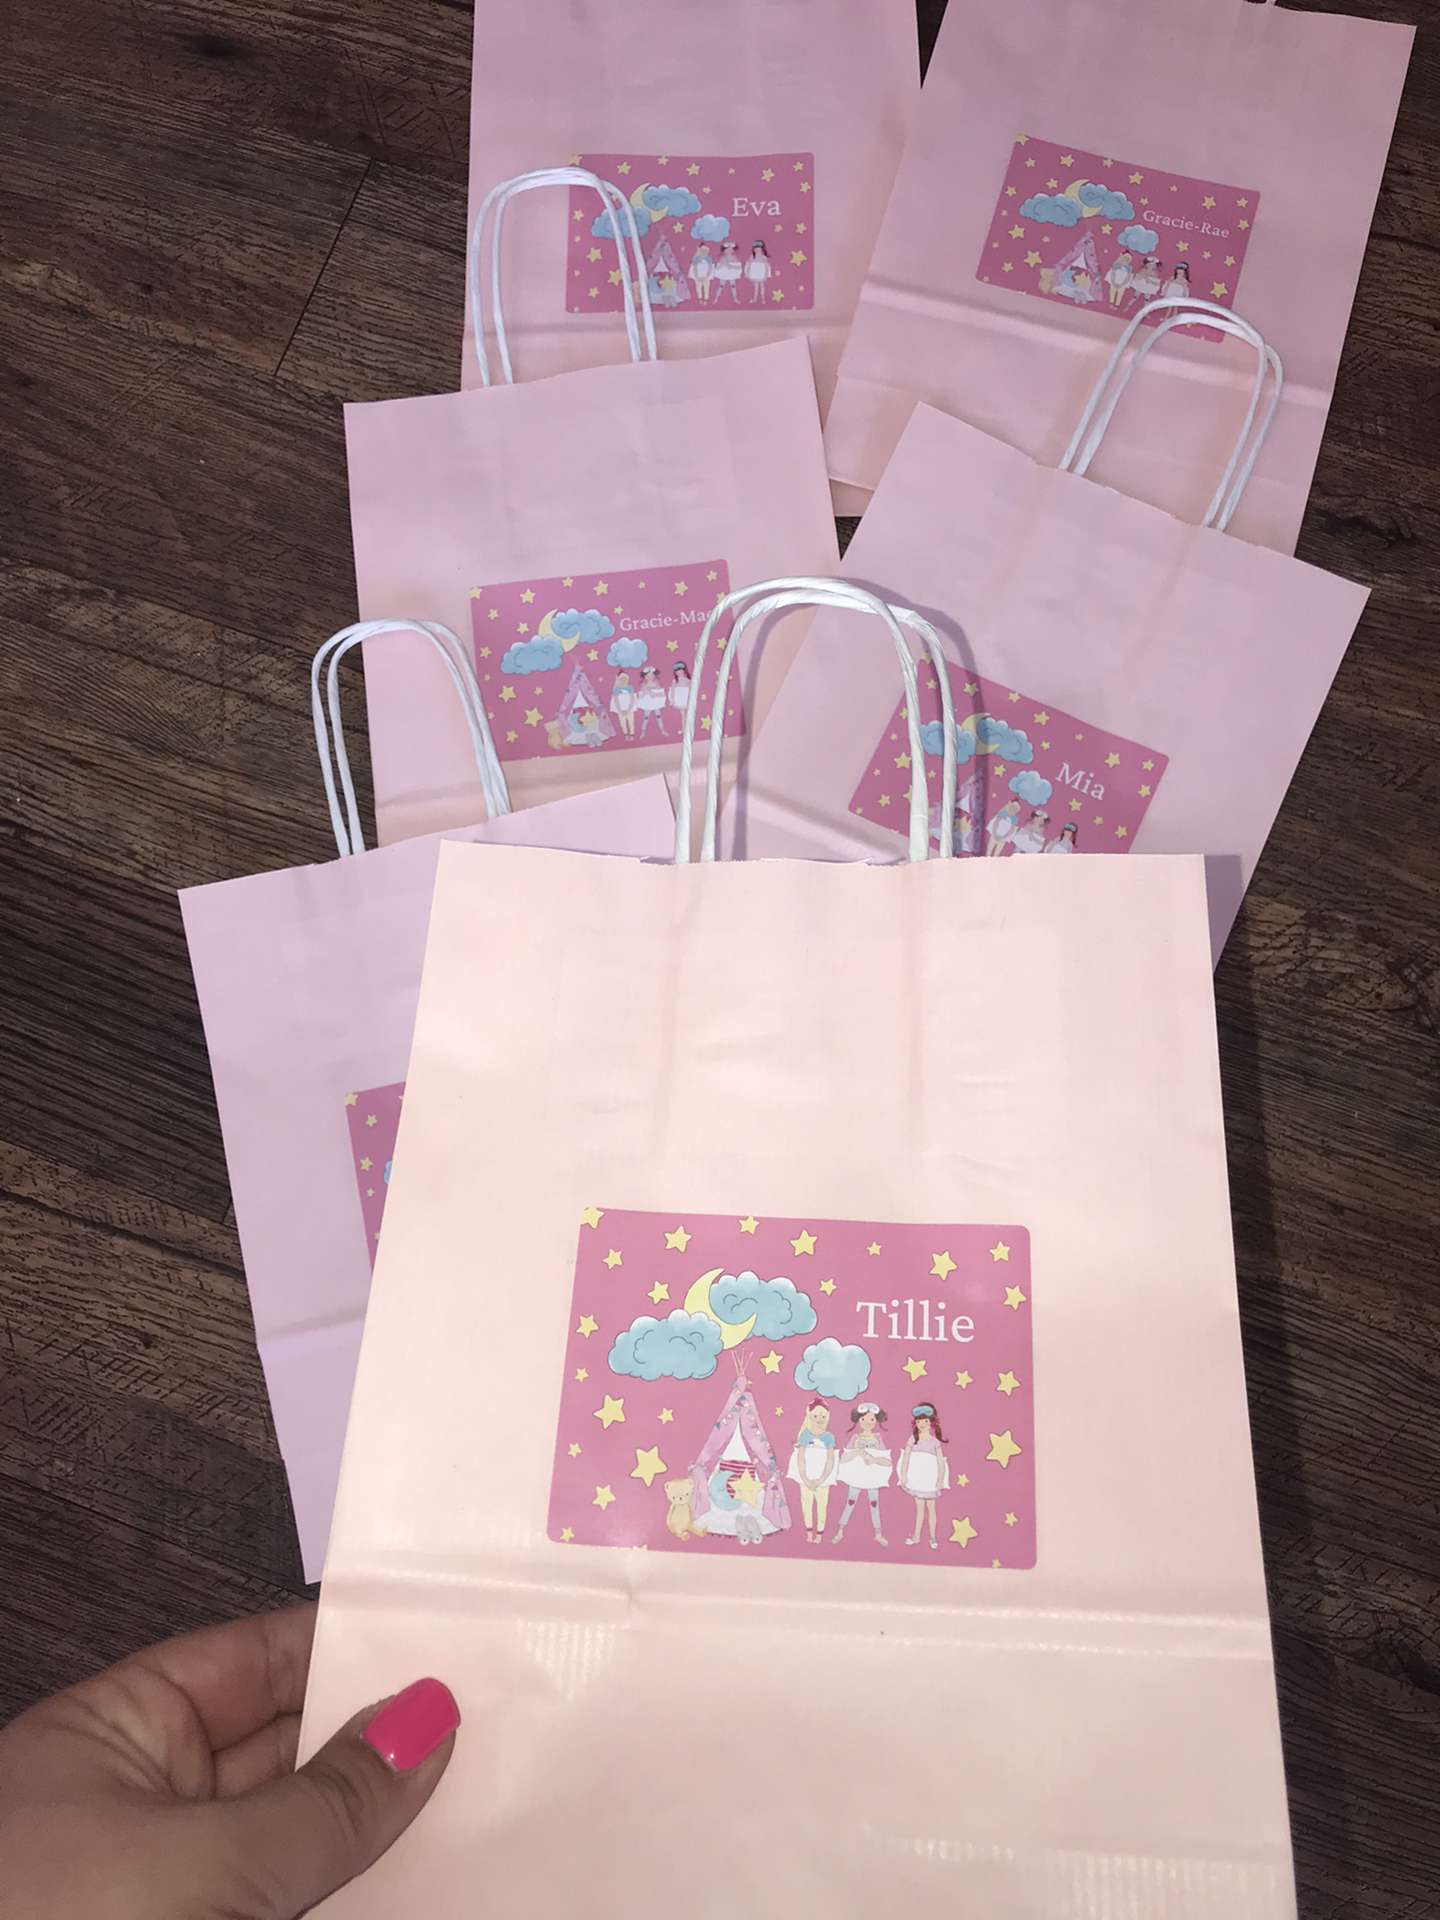 Teepee Sleepover Party | Teepee Sleepover Party Bags | Themed Party Bags | Girls Party Bags